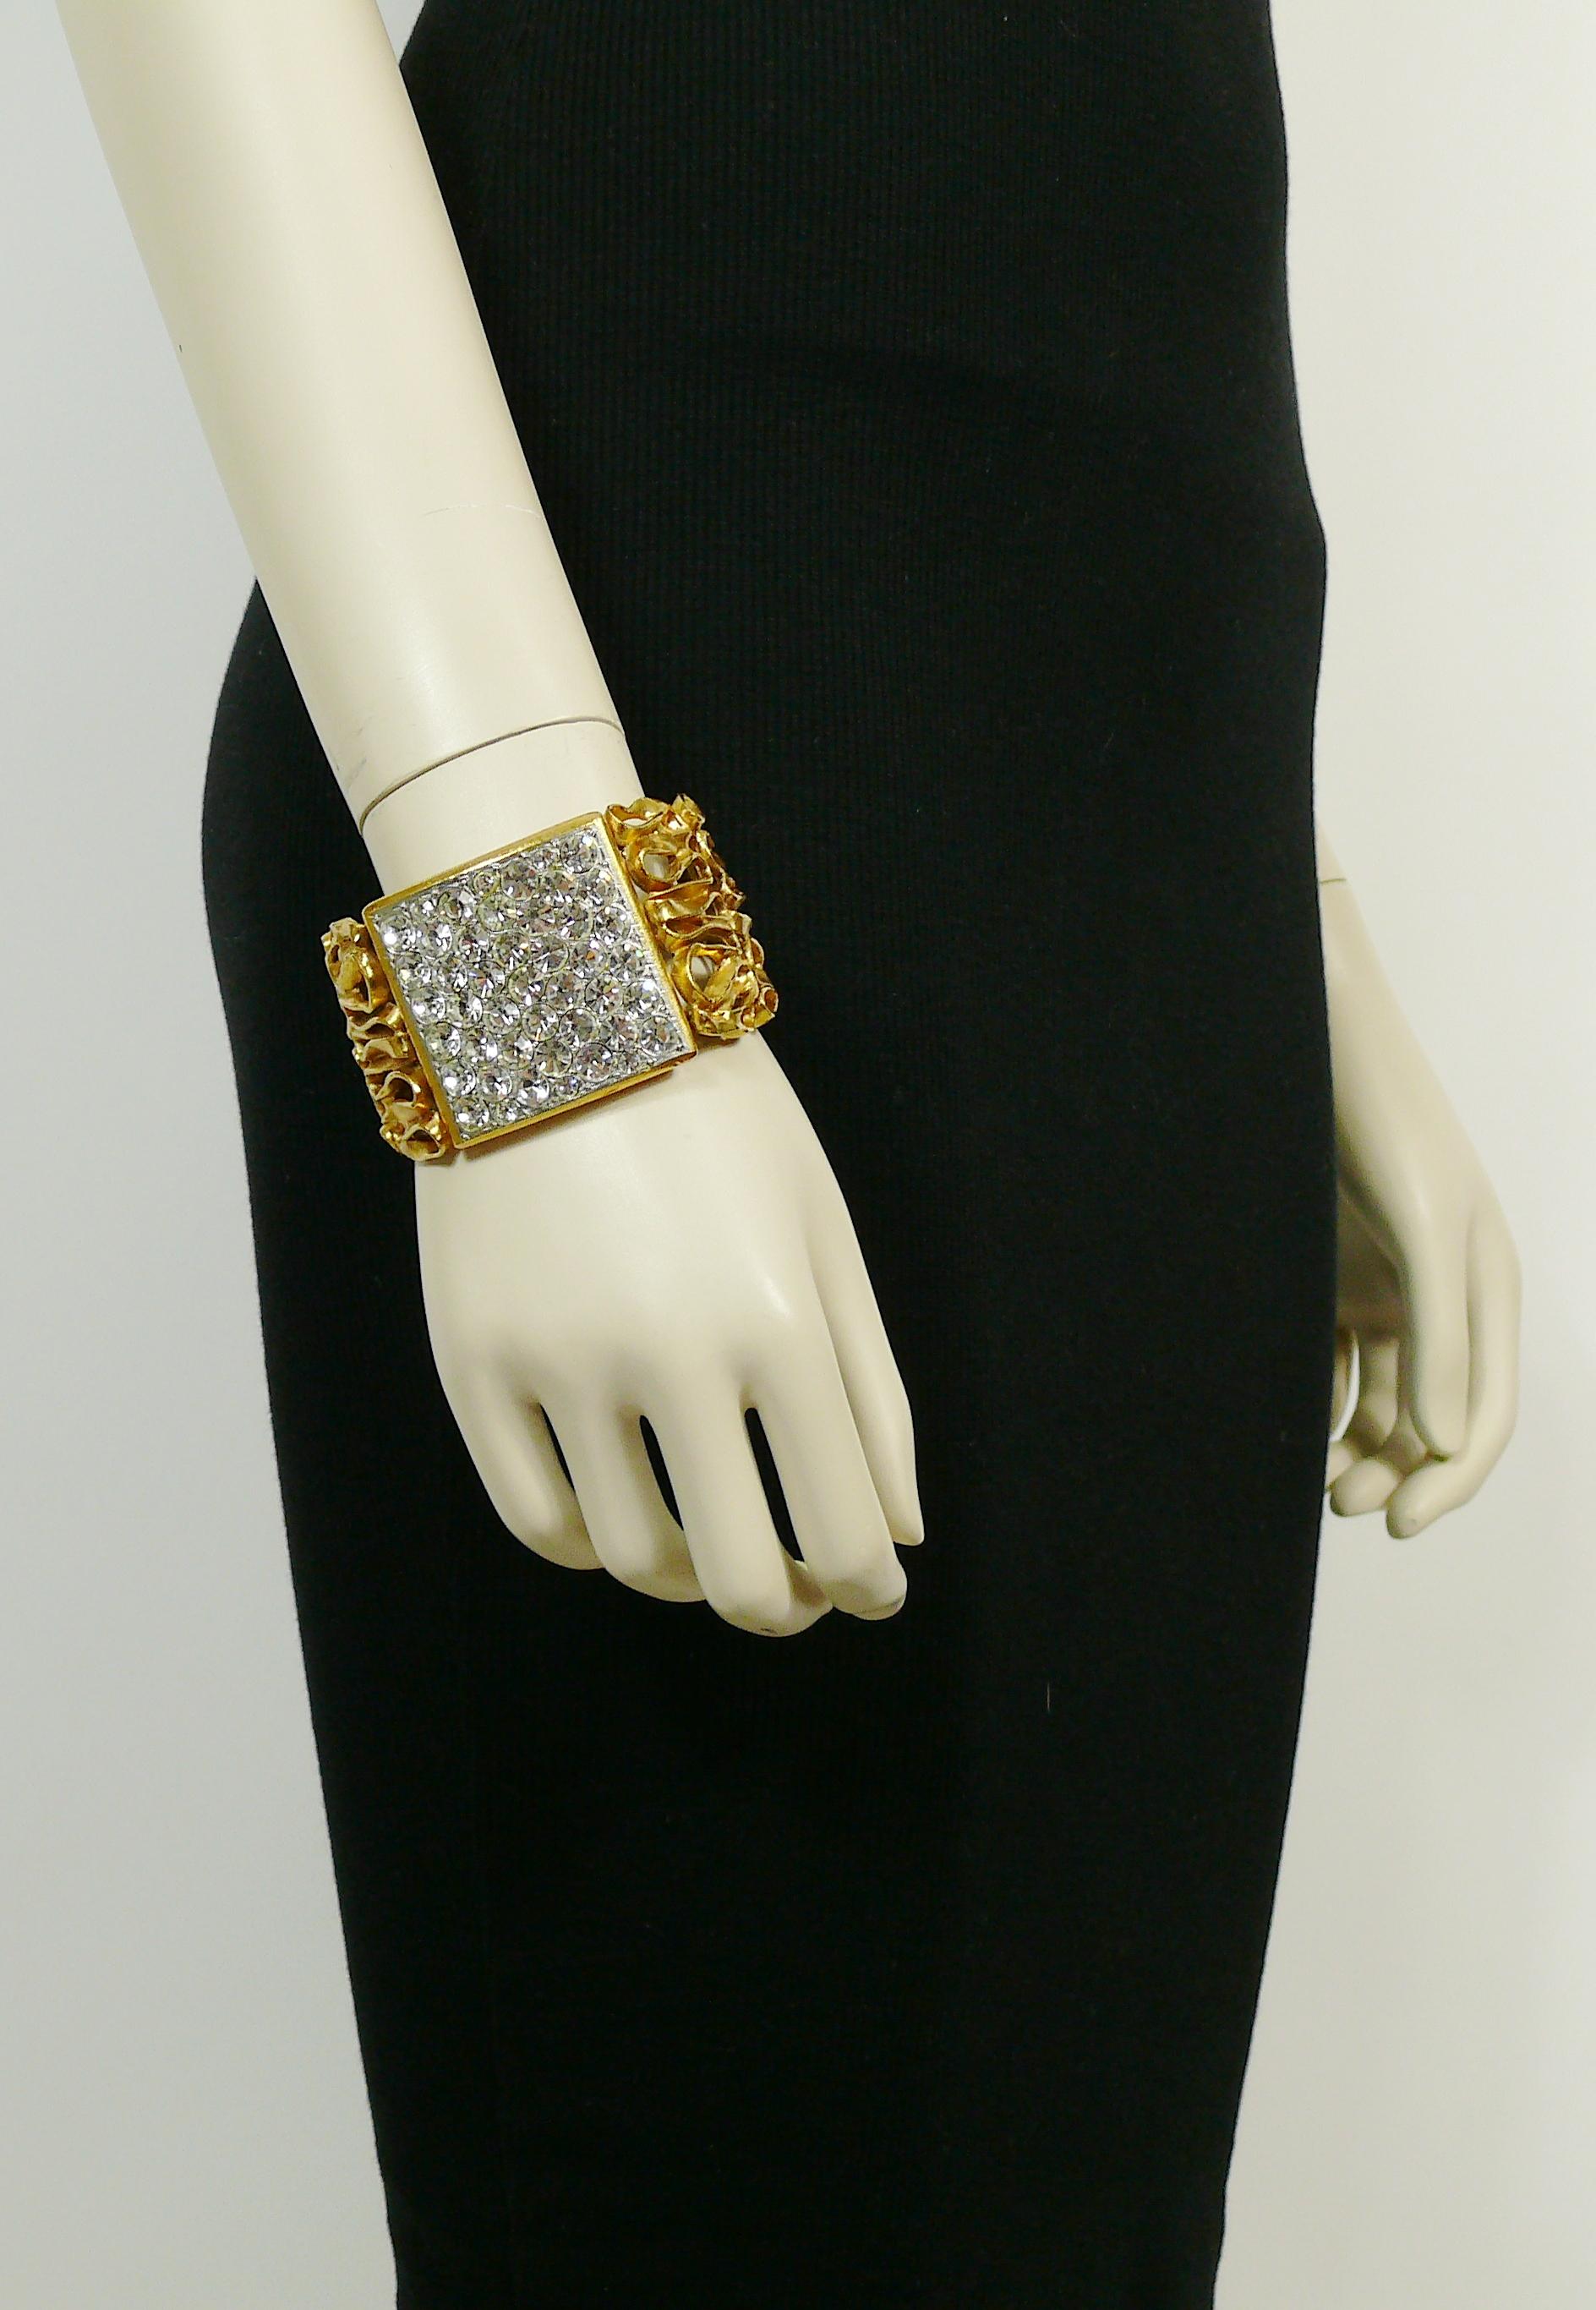 YVES SAINT LAURENT vintage rare gold toned cuff bracelet featuring a coiled wire pattern and a large square section embellished with clear crystals.

Embossed YVES SAINT LAURENT RIVE GAUCHE Made in France.

Indicative measurements : inner